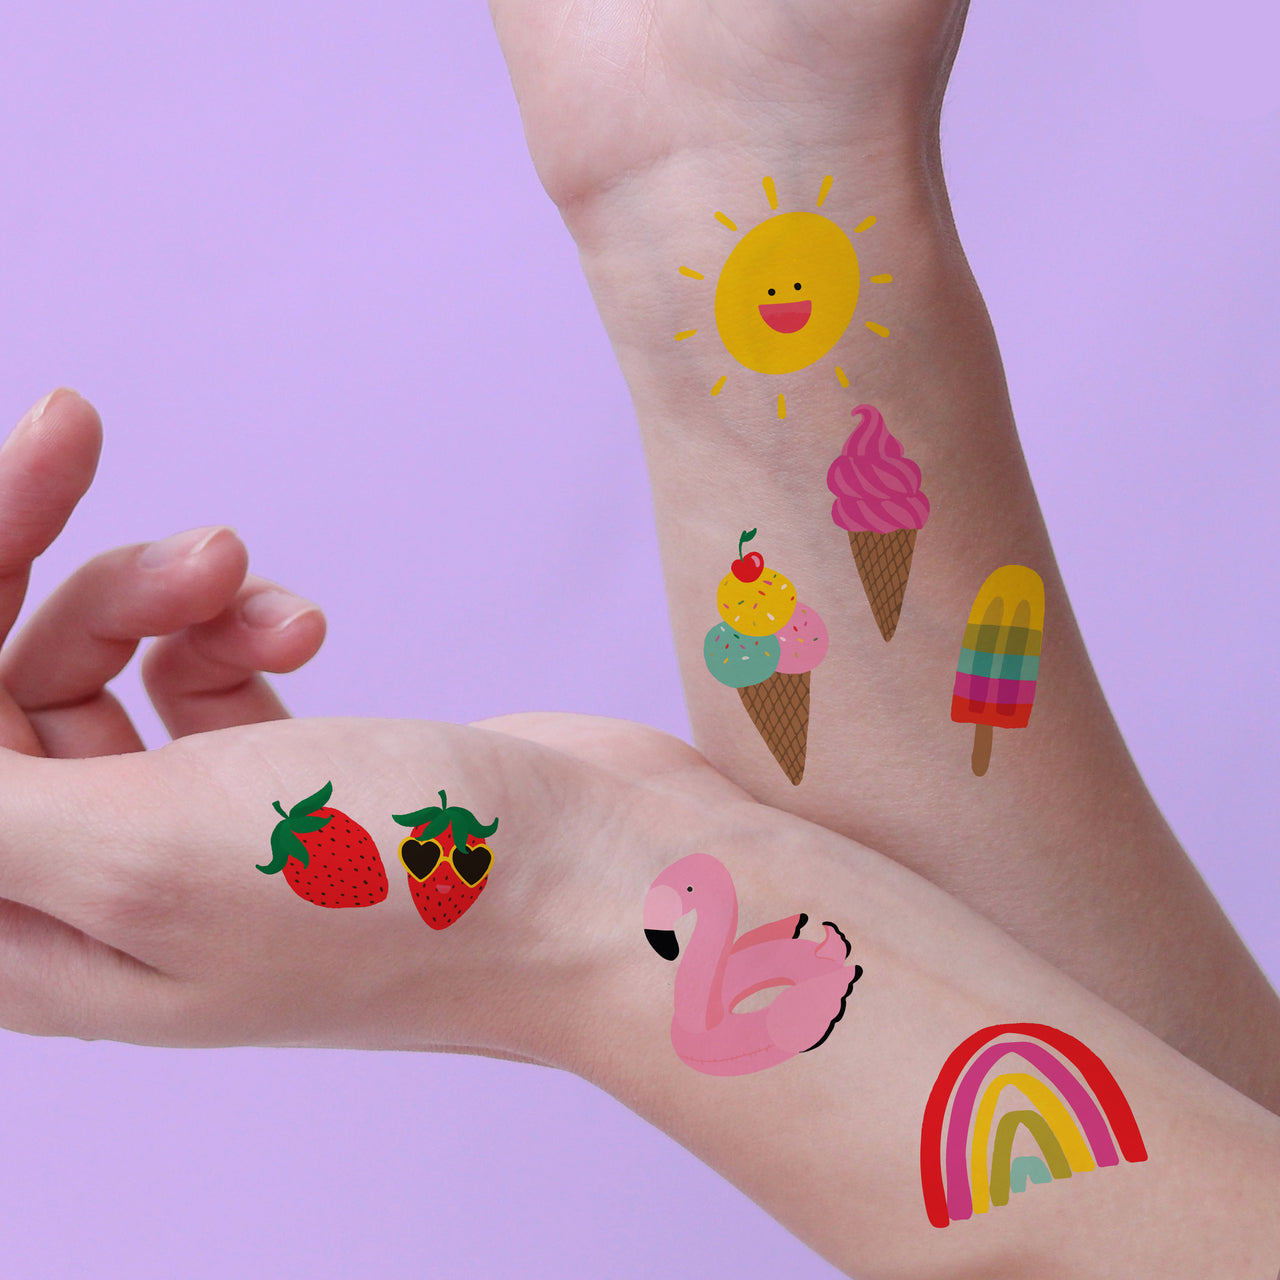 Summer Fun Variety set features 25 assorted summer inspired colorful tattoos: flamingo, gold palm tree, strawberries, popsicles, ice cream, flamingo float, sun and rainbow.